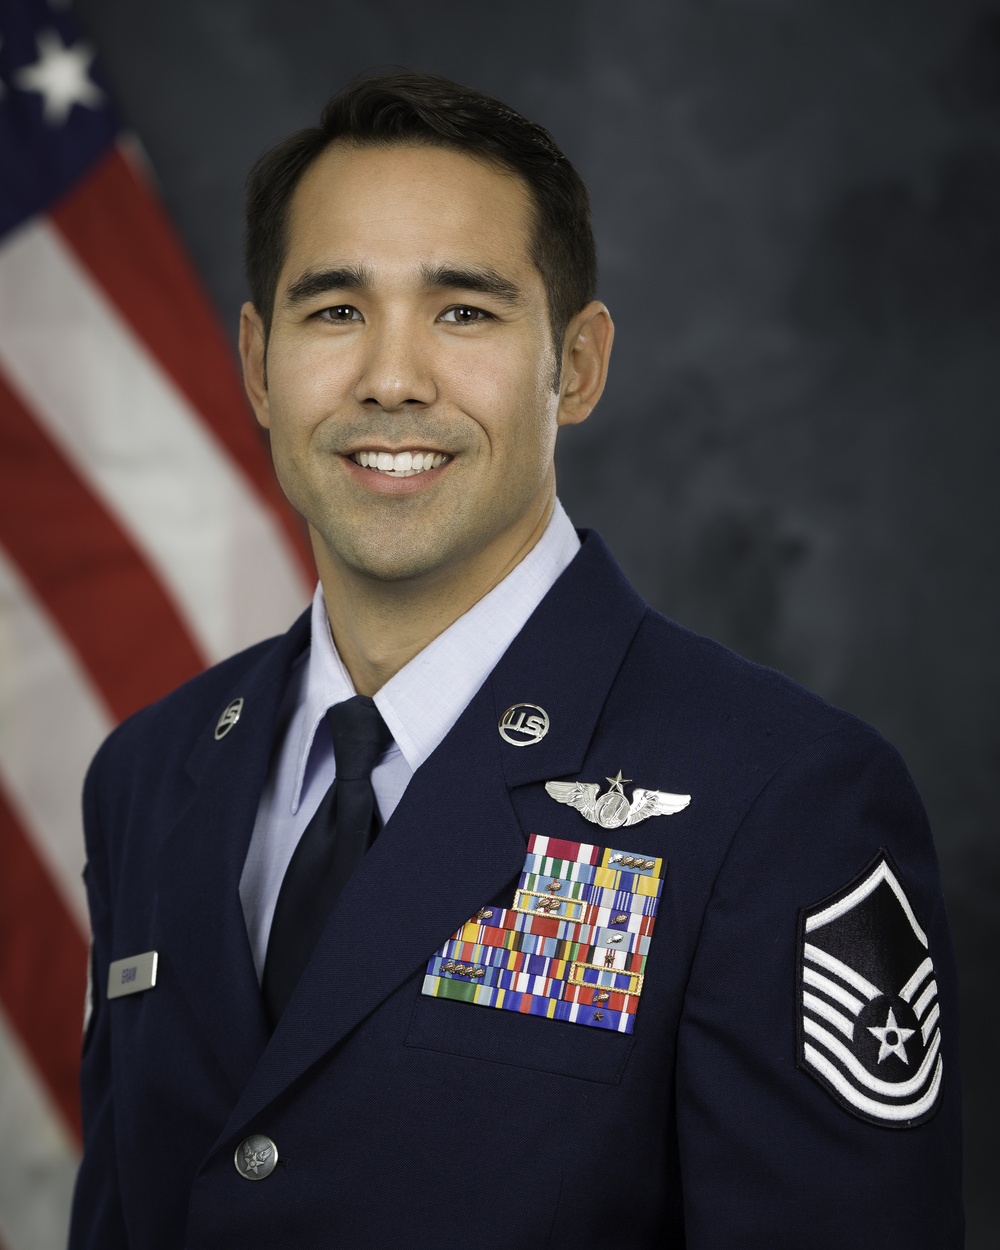 Official portrait, Master Sgt. Jonah M. Graw, US Air Force